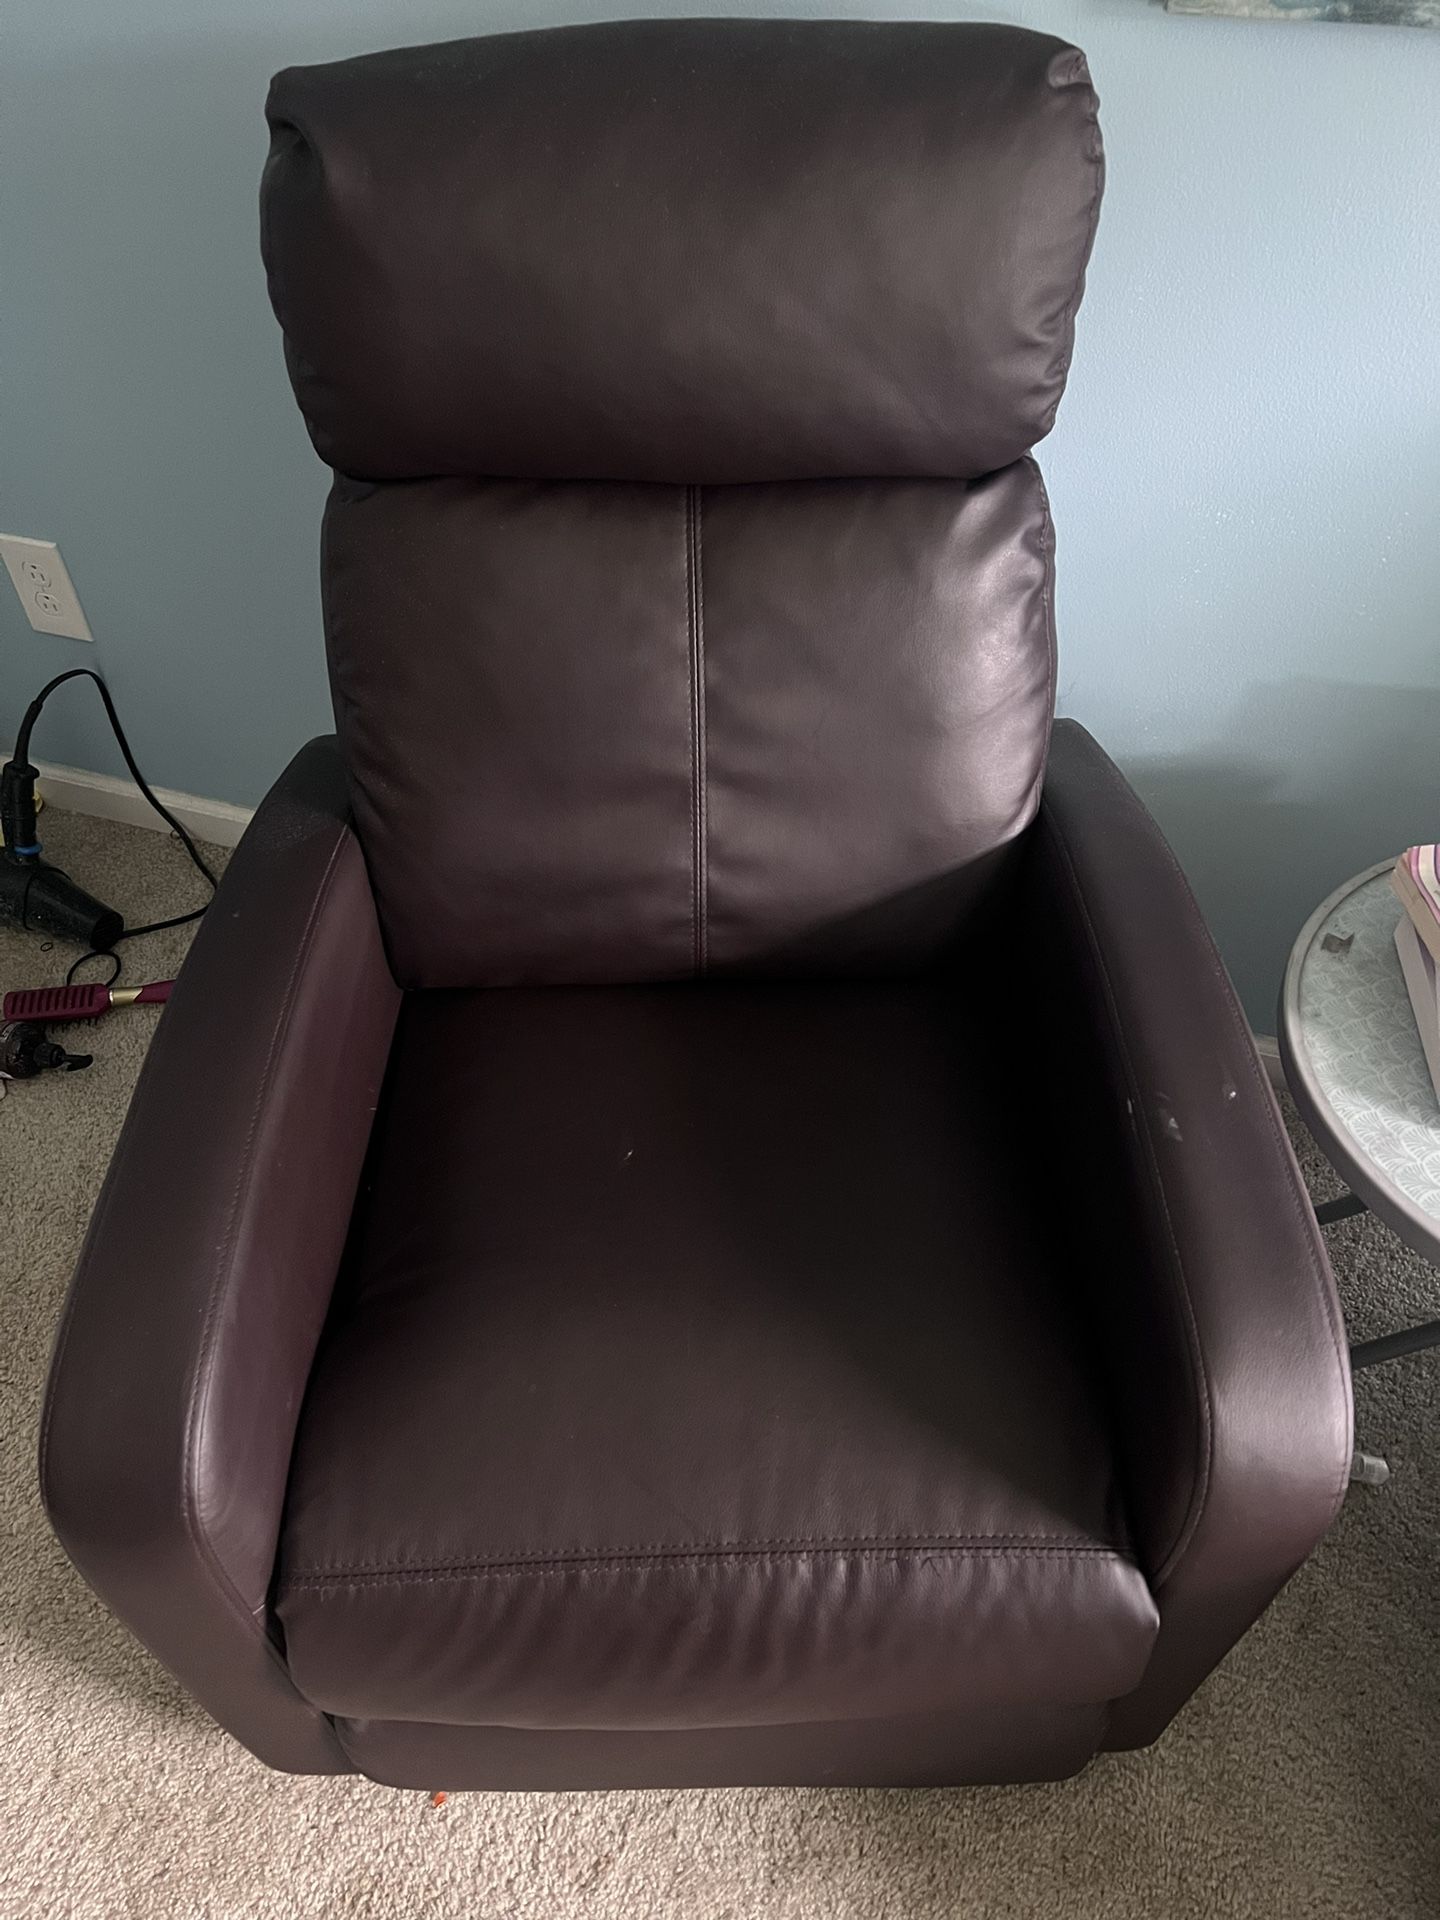 Small Recliners $100/each